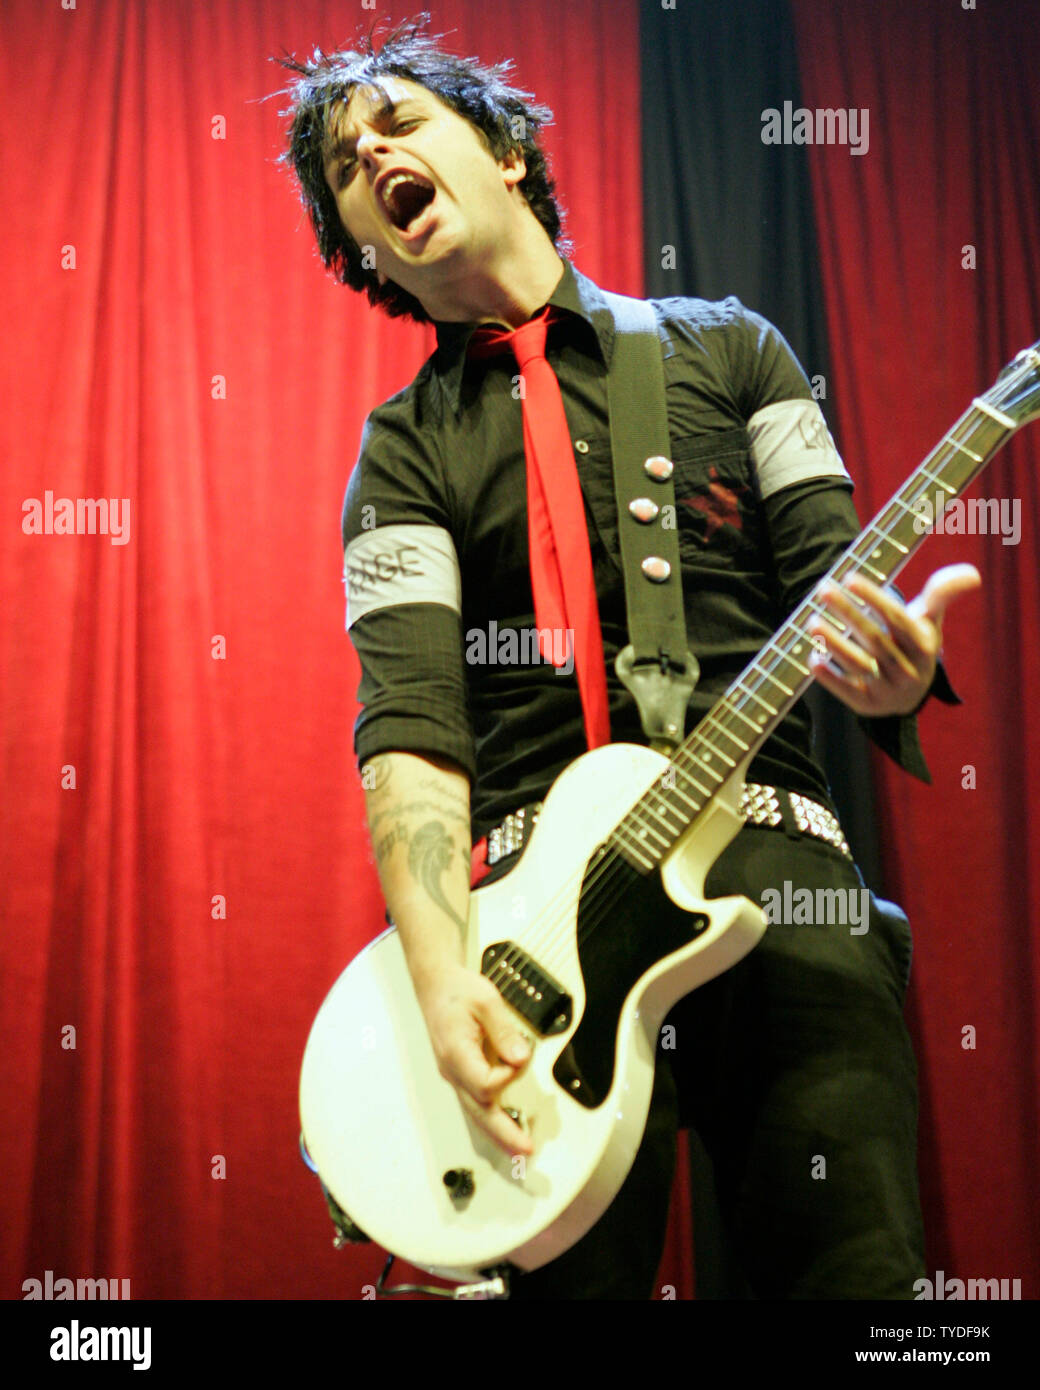 Billie Joe Armstrong 2005 High Resolution Stock Photography and Images -  Alamy